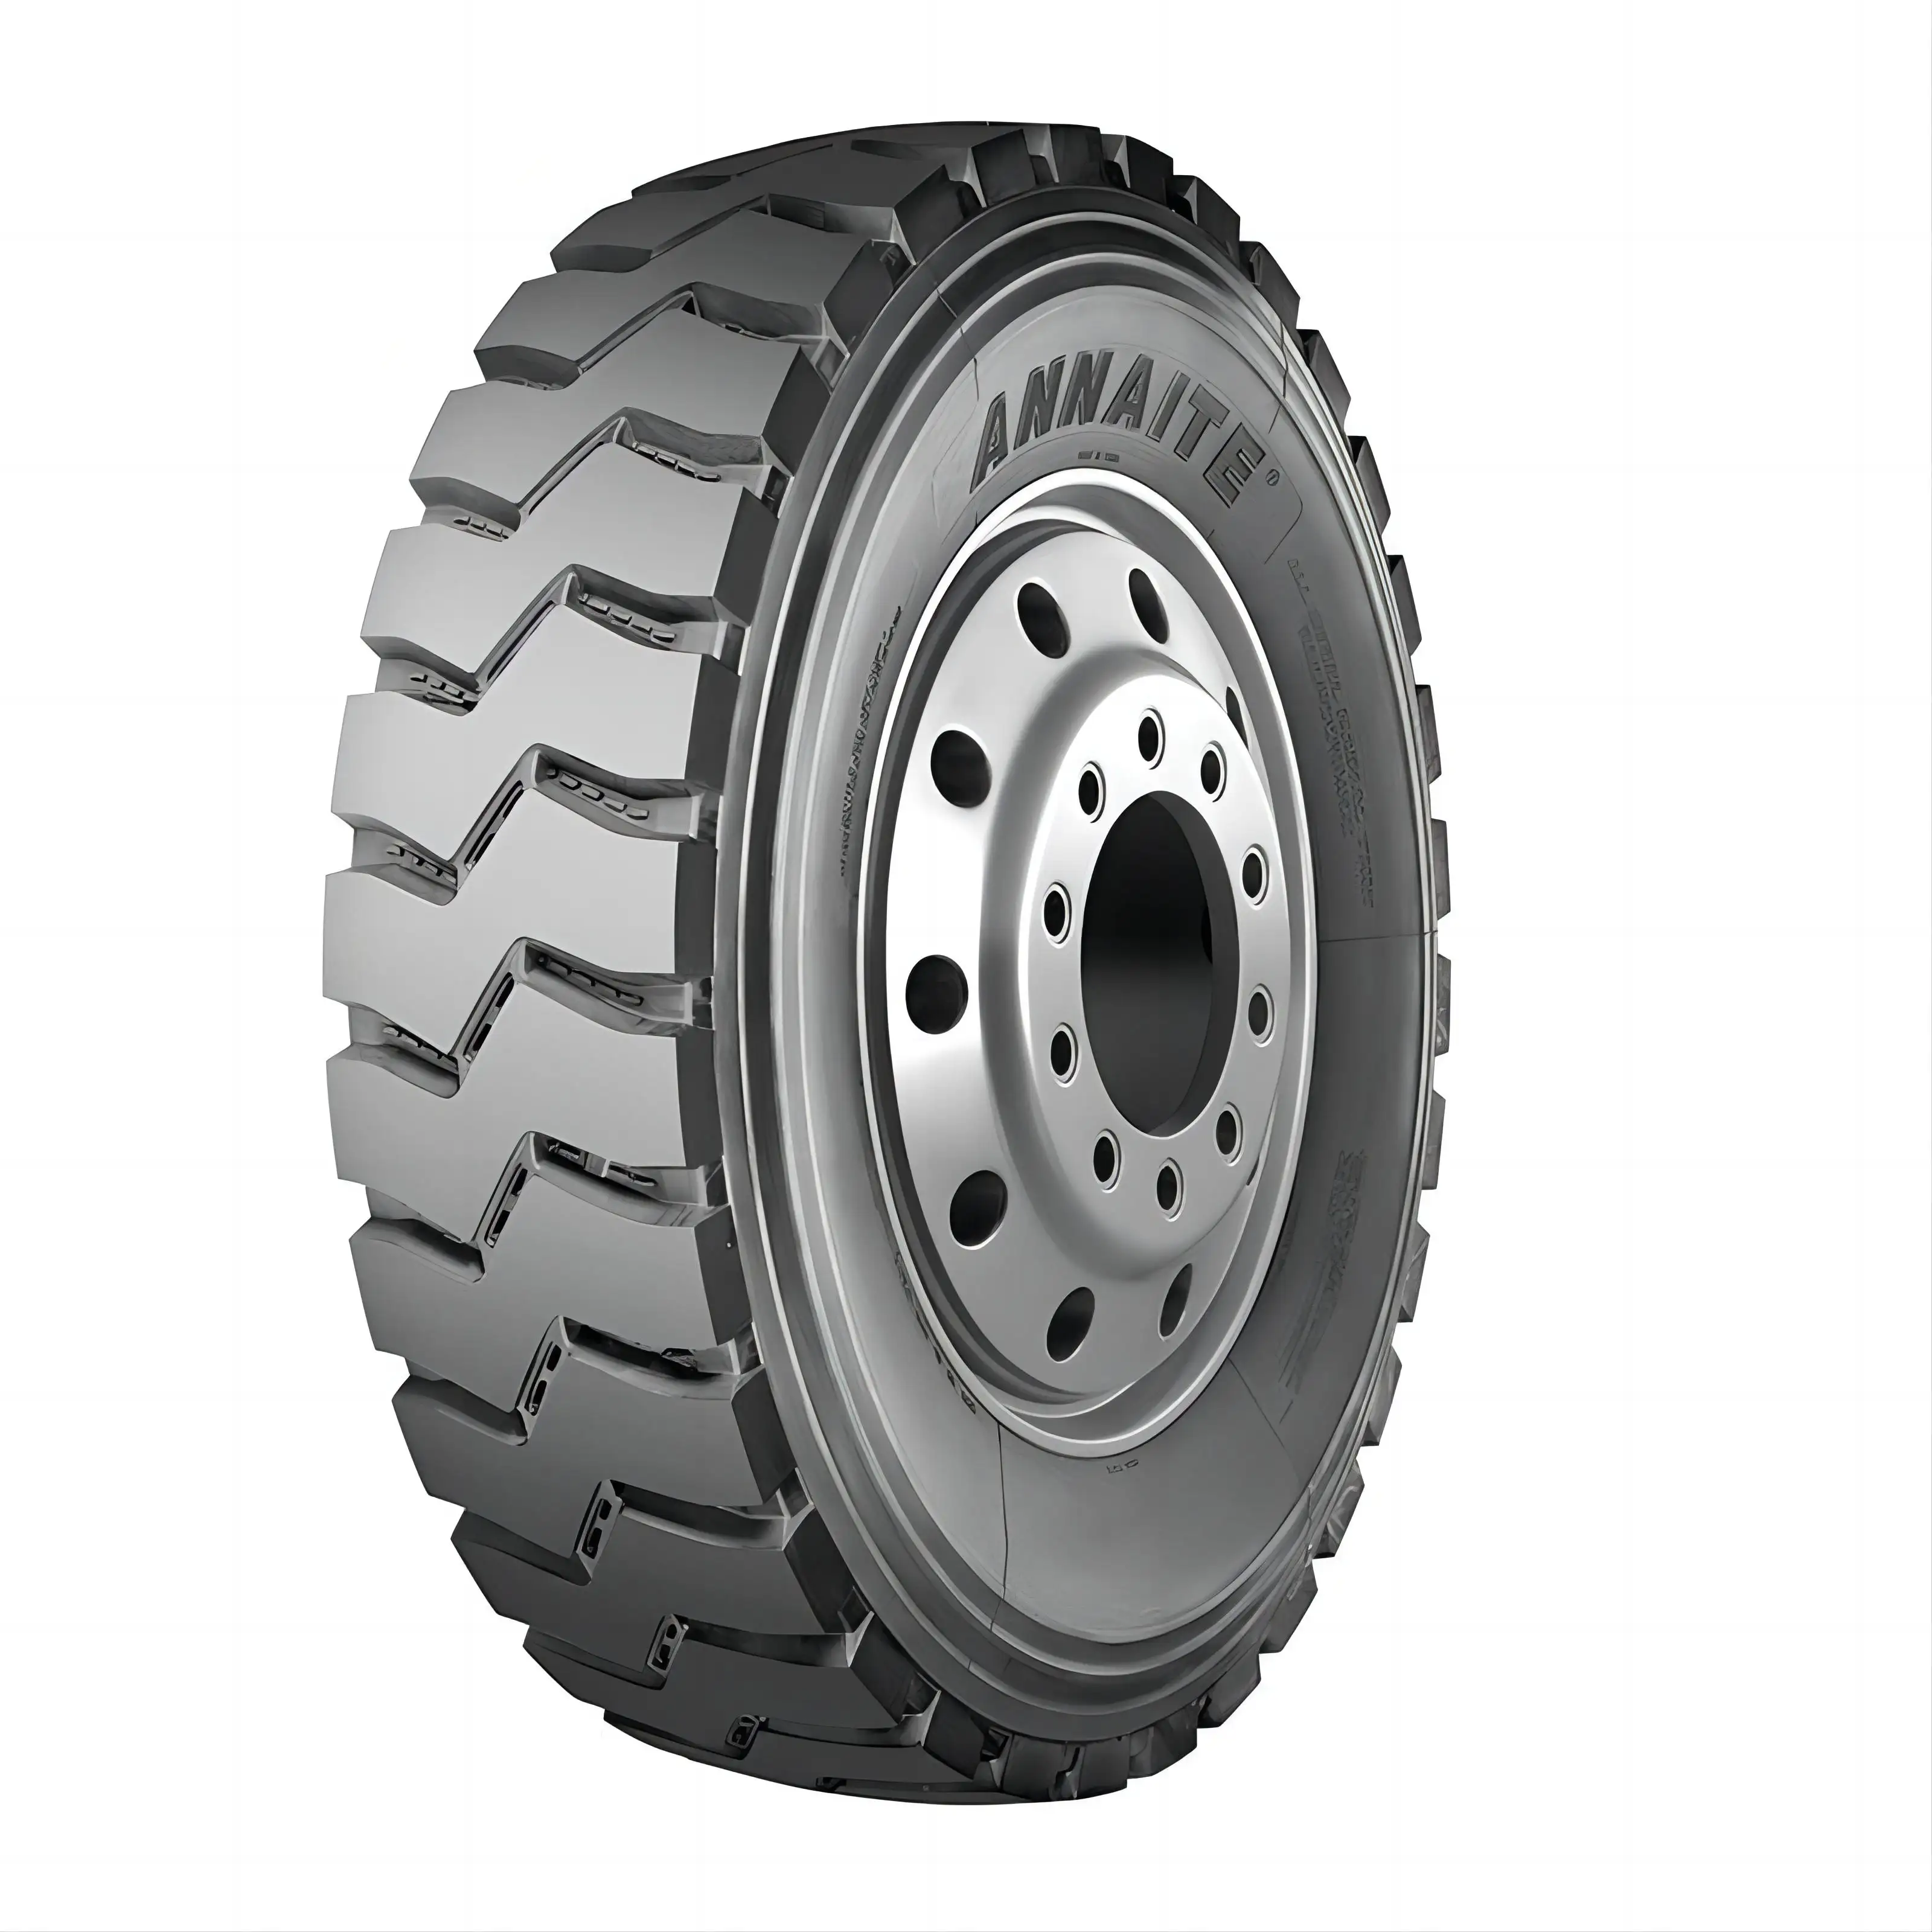 Hot sale load truck tire on mining vehicles 8.25r16 light truck tires 8.25r20 11r22.5 1200 20 315 80 22.5 with cheap price list